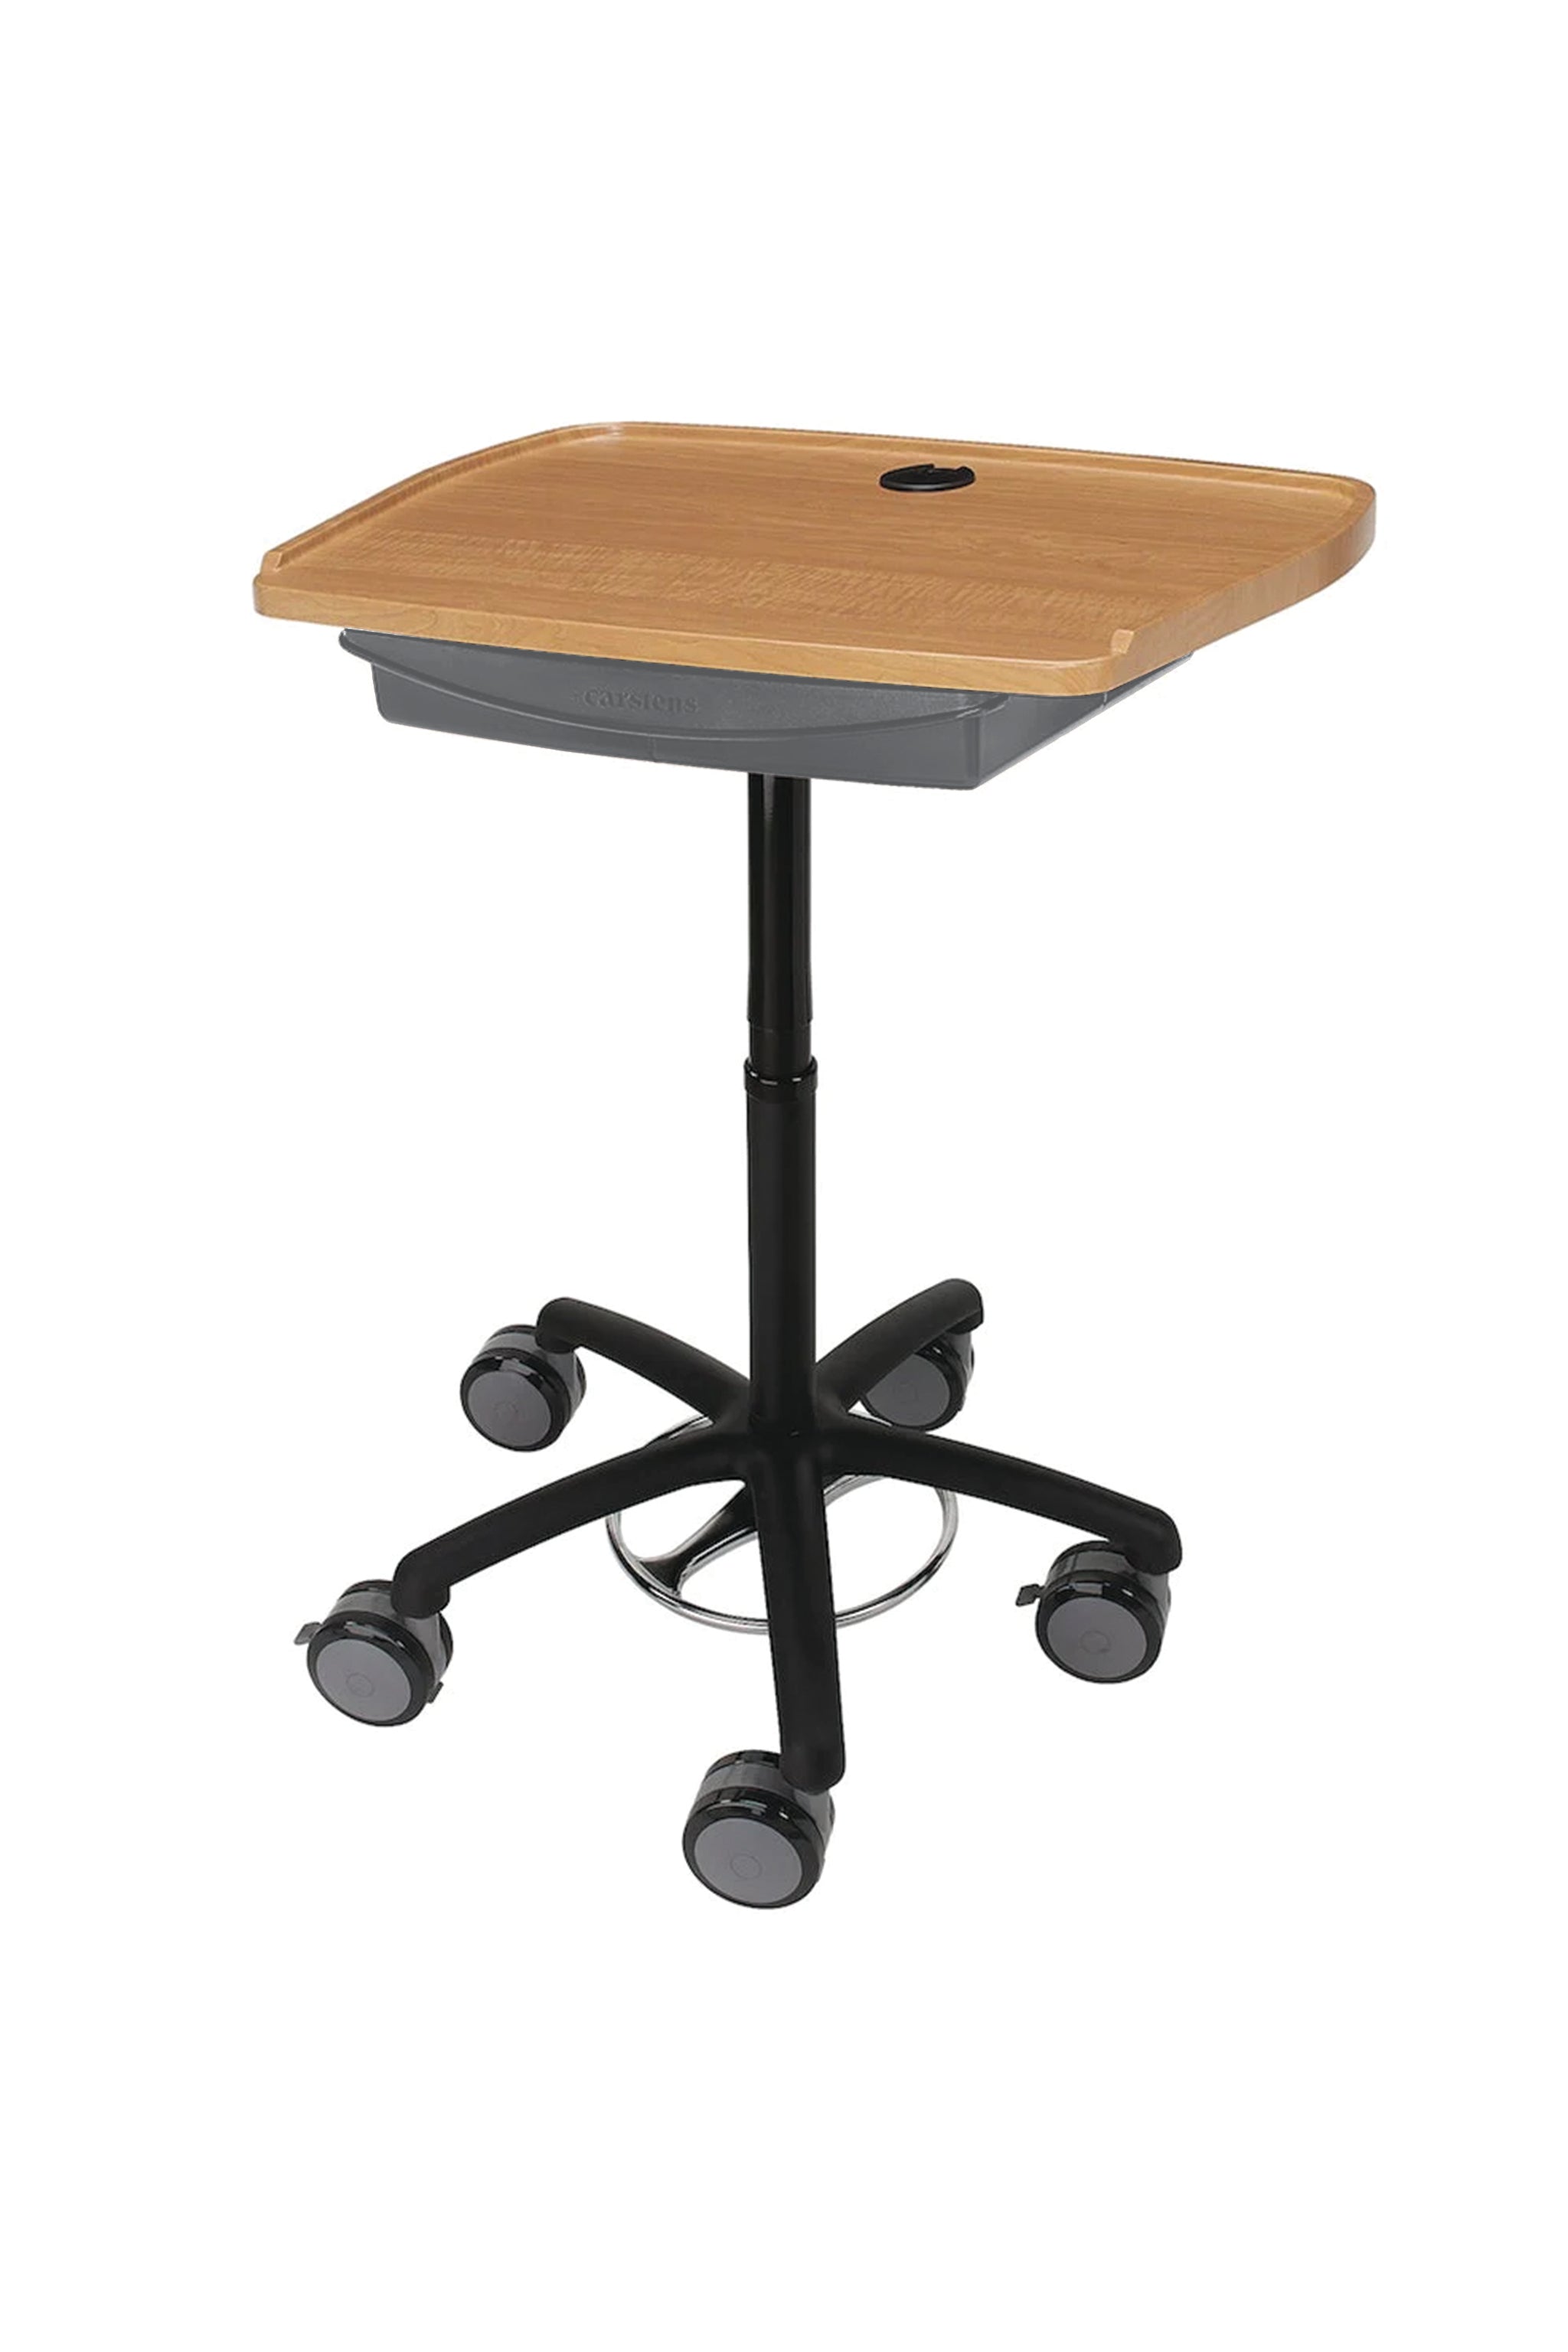 WALKAroo™ 6430 Standard Mobile Laptop Desk and Workstation with Supply Drawer – Height Adjustable from 31.5" to 41.5"